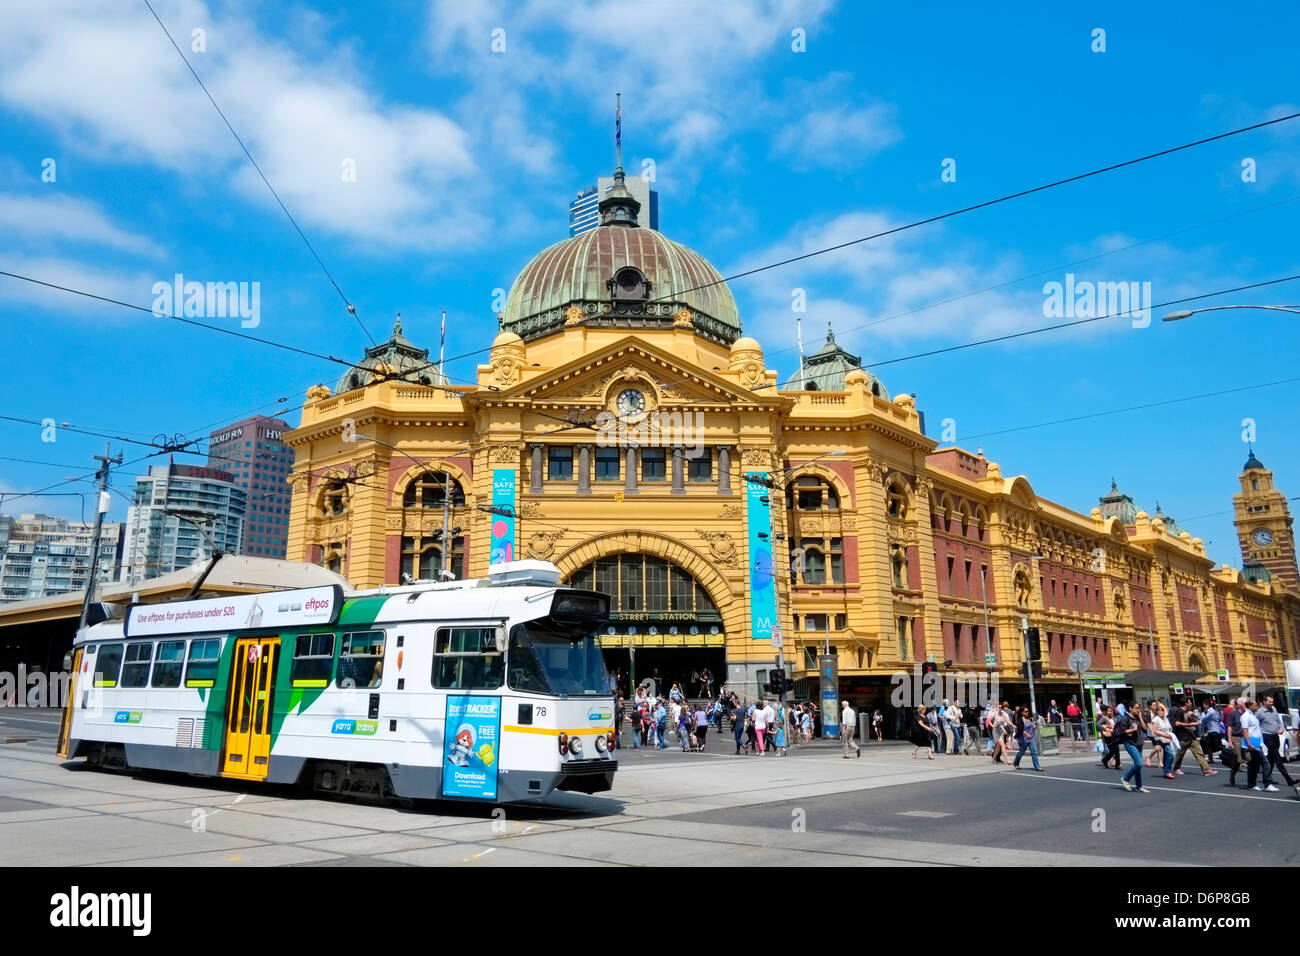 Flinders Railway Station with public tram in central Melbourne Australia Stock Photo